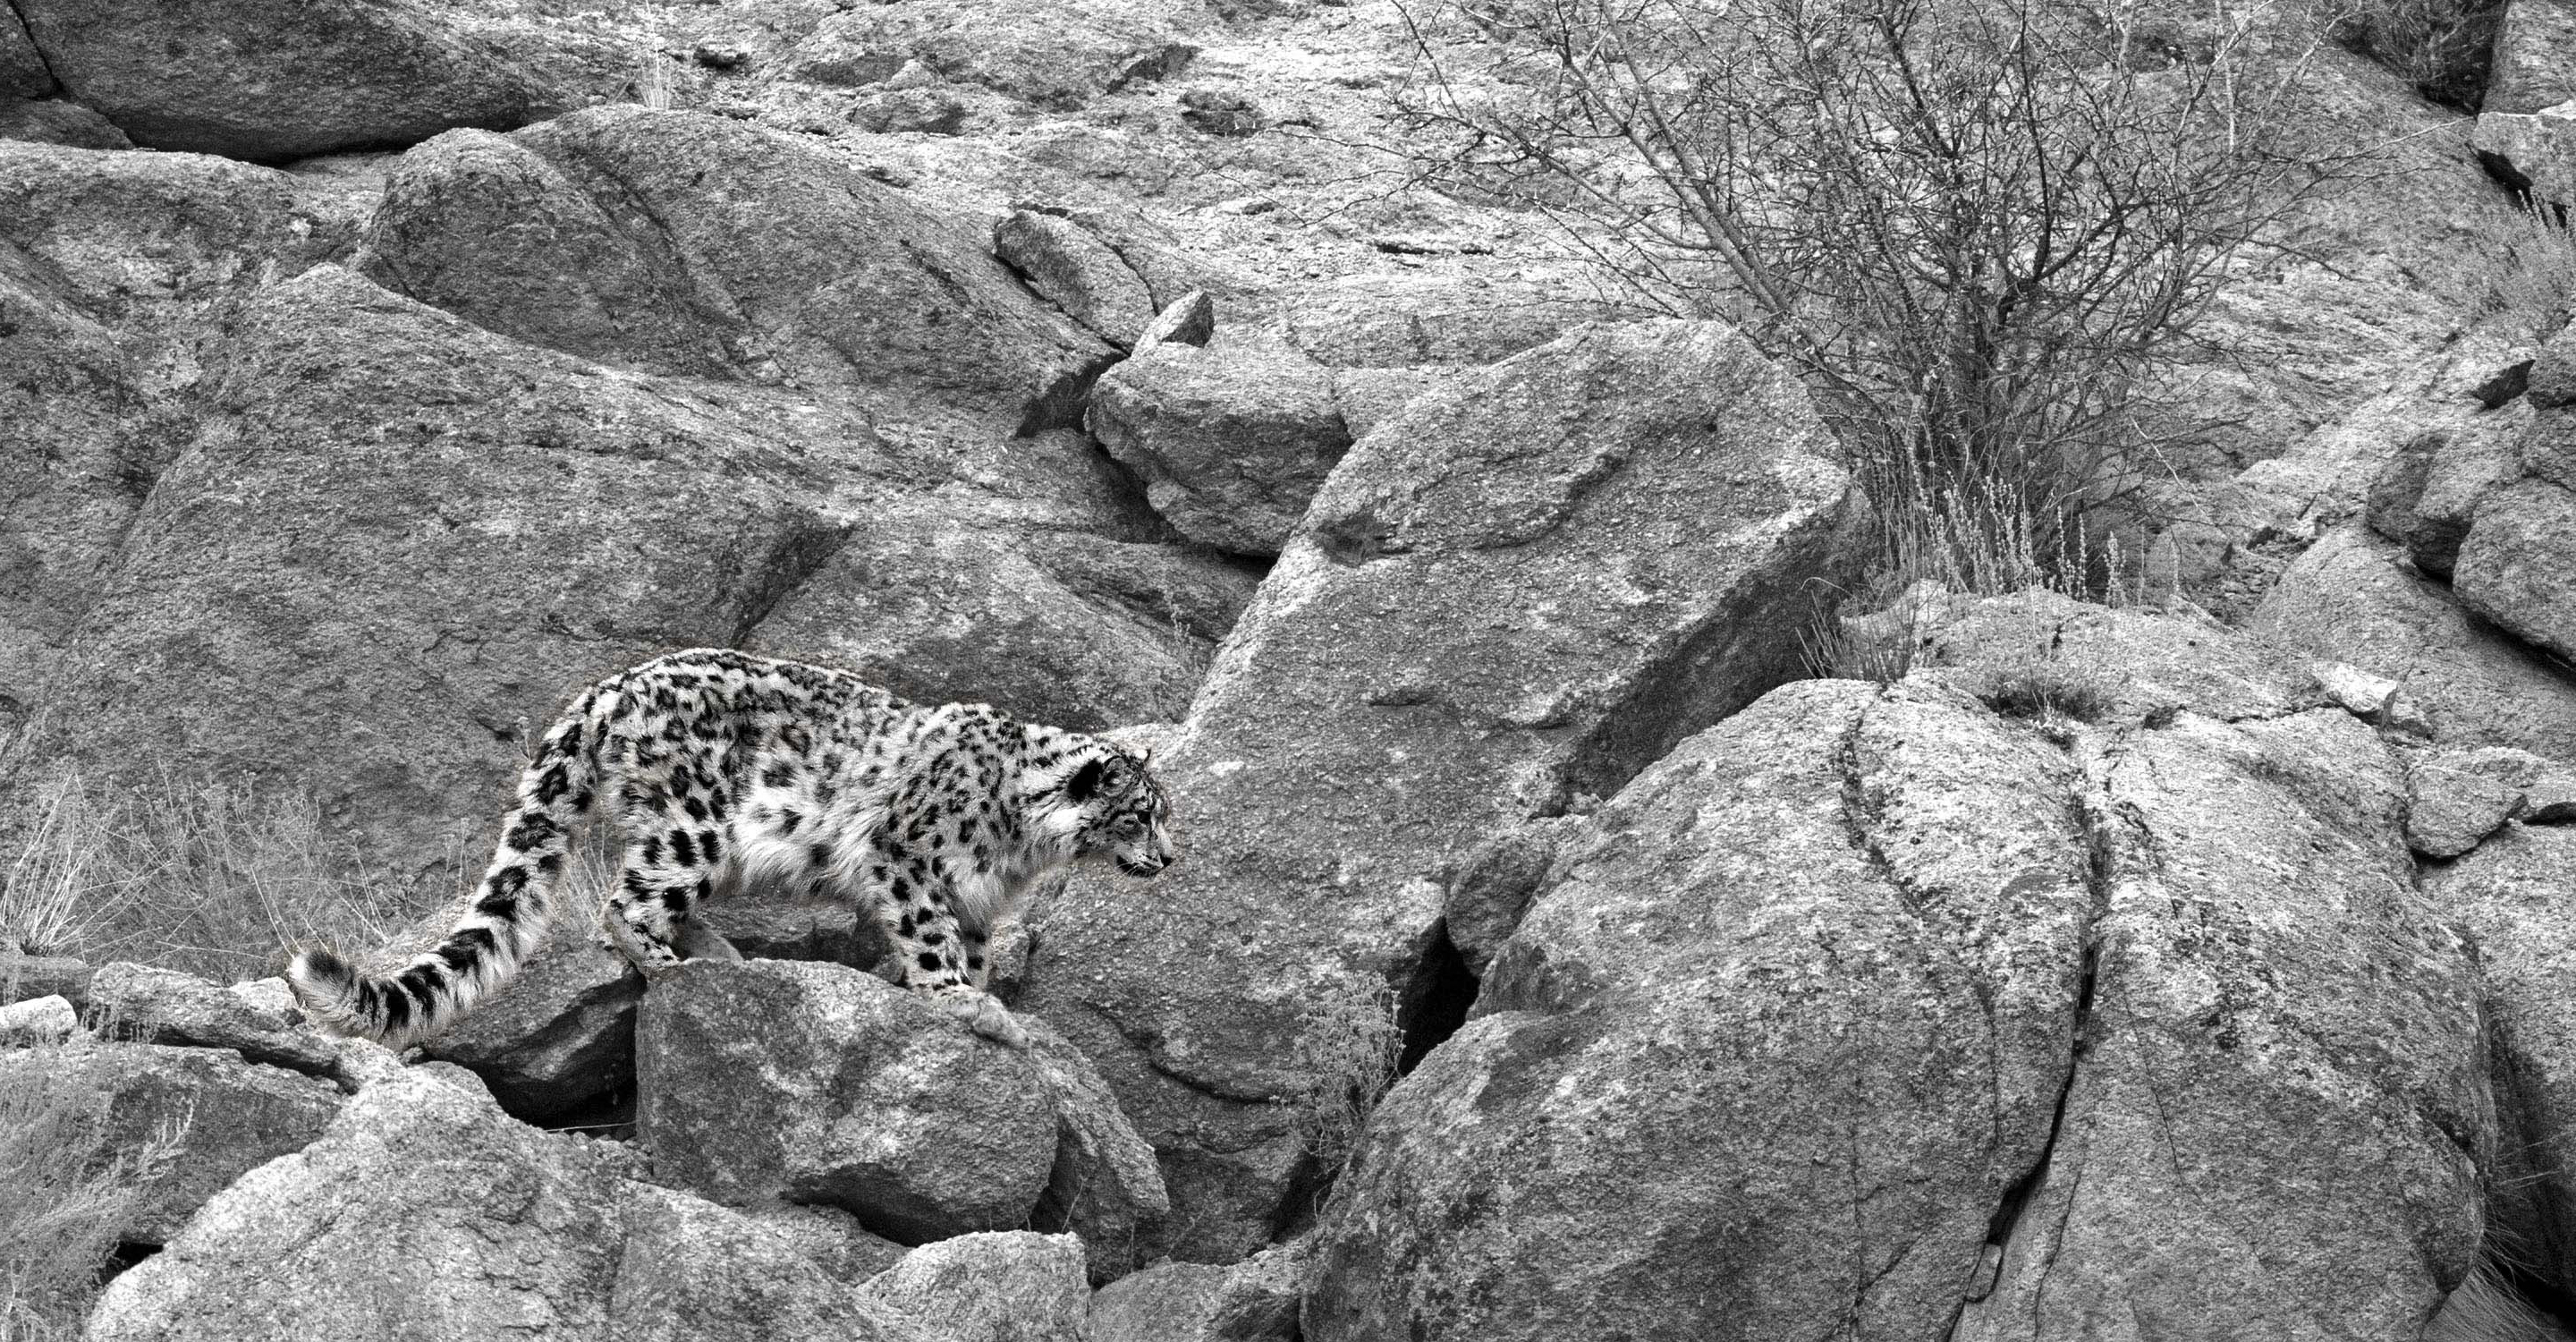 A black and white image of a snow leopard perched on a rock in Ladakh, India